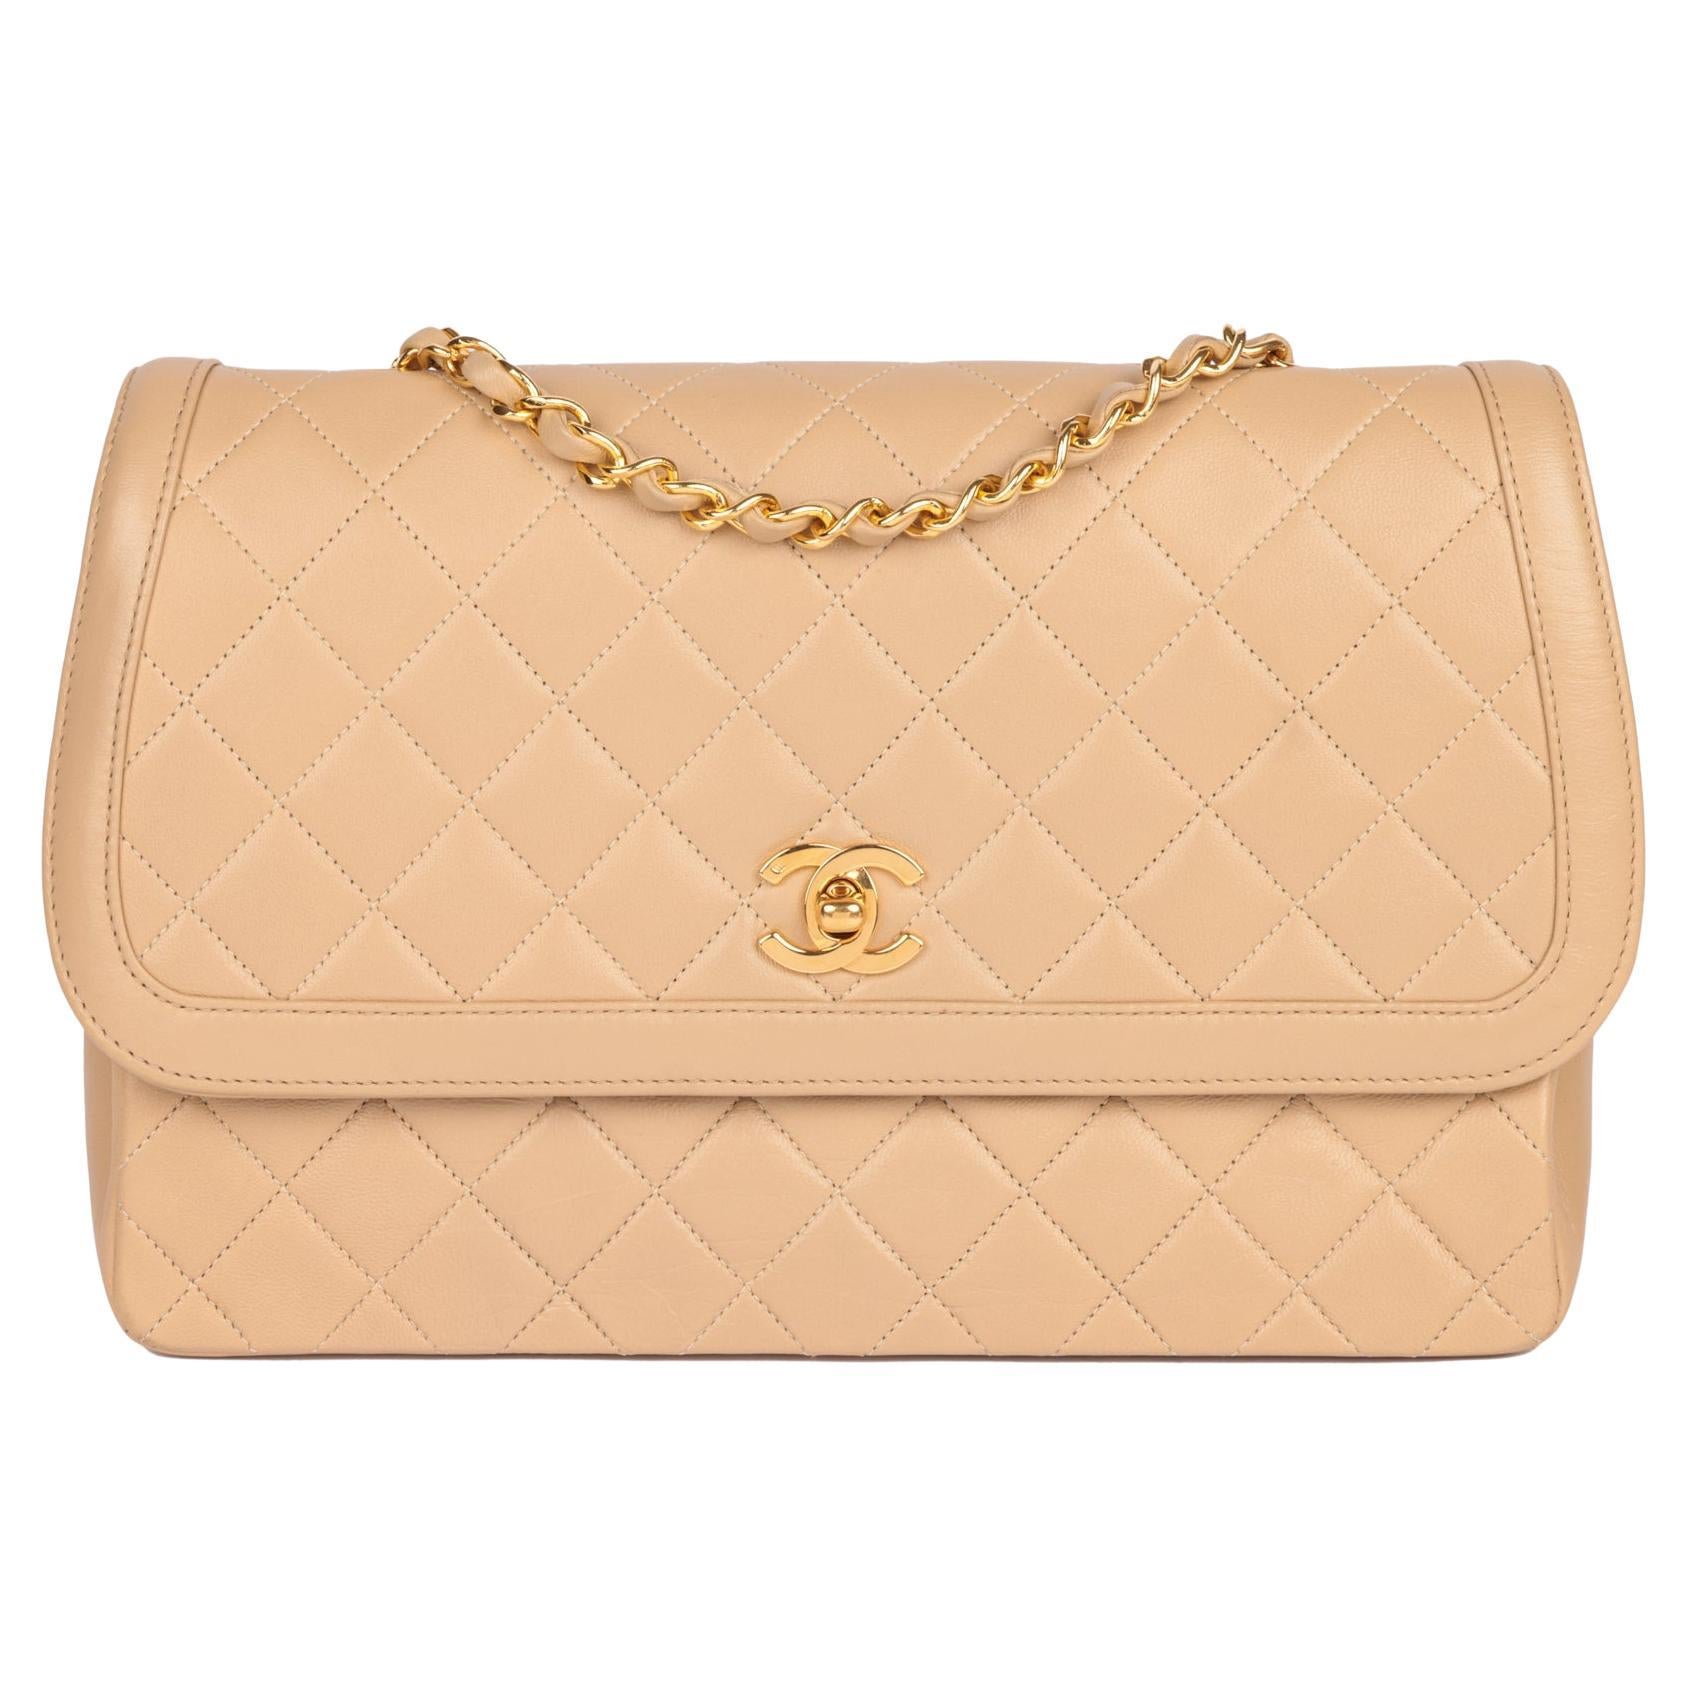 CHANEL Beige Quilted Lambskin Vintage Medium Classic Single Flap Bag with Wallet For Sale